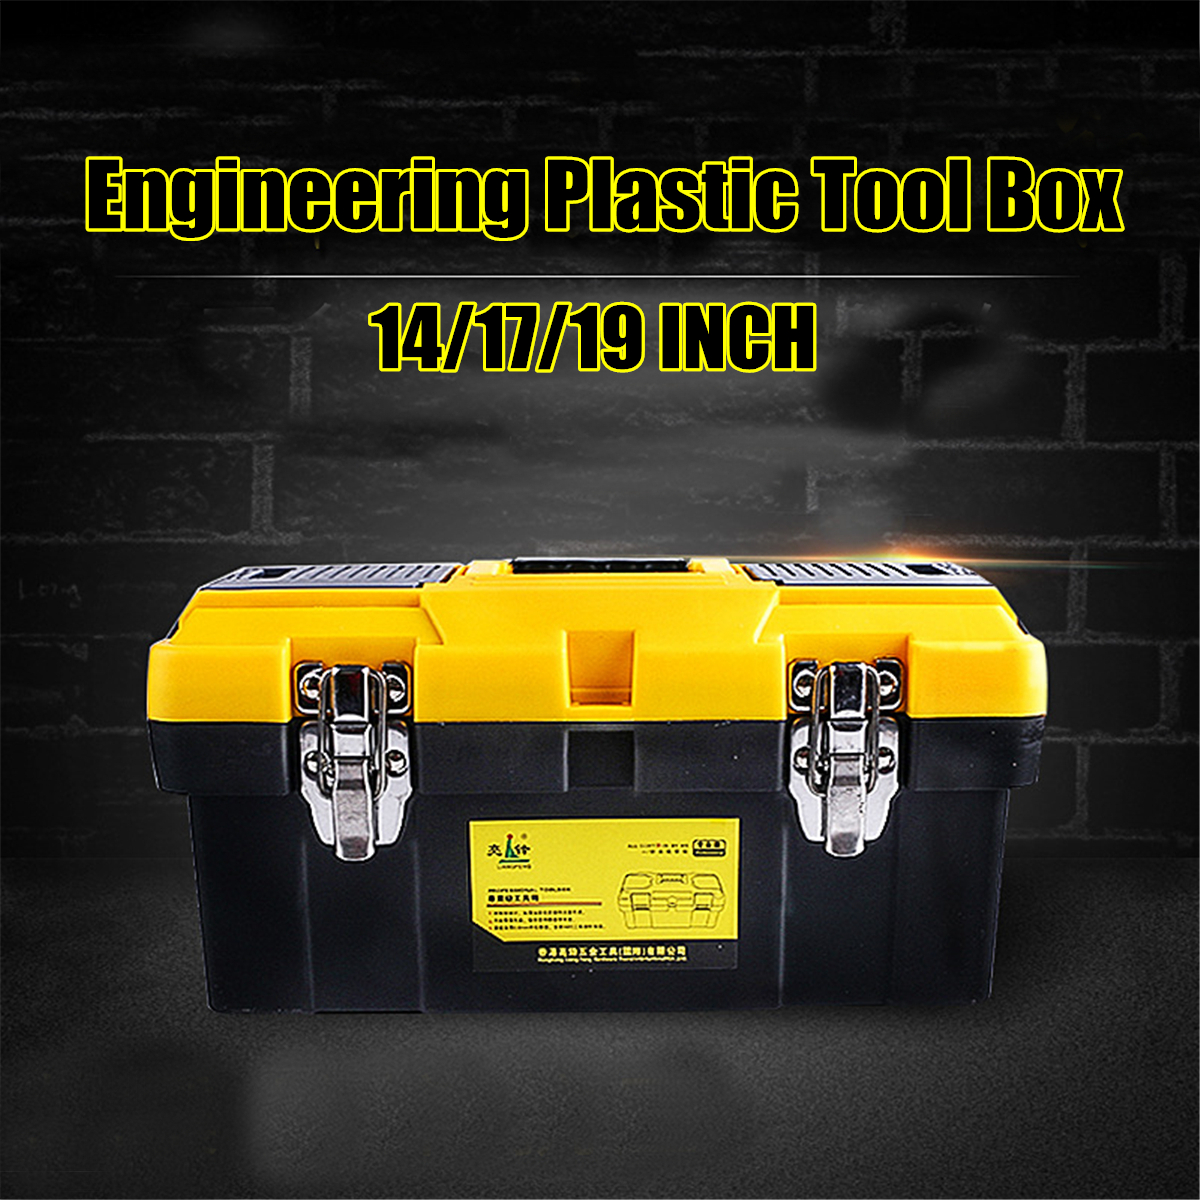 141719-Inch-Plastic-Work-Tools-Storage-Box-Protable-Carrying-Case-Handle-Accessories-Holder-1321332-2